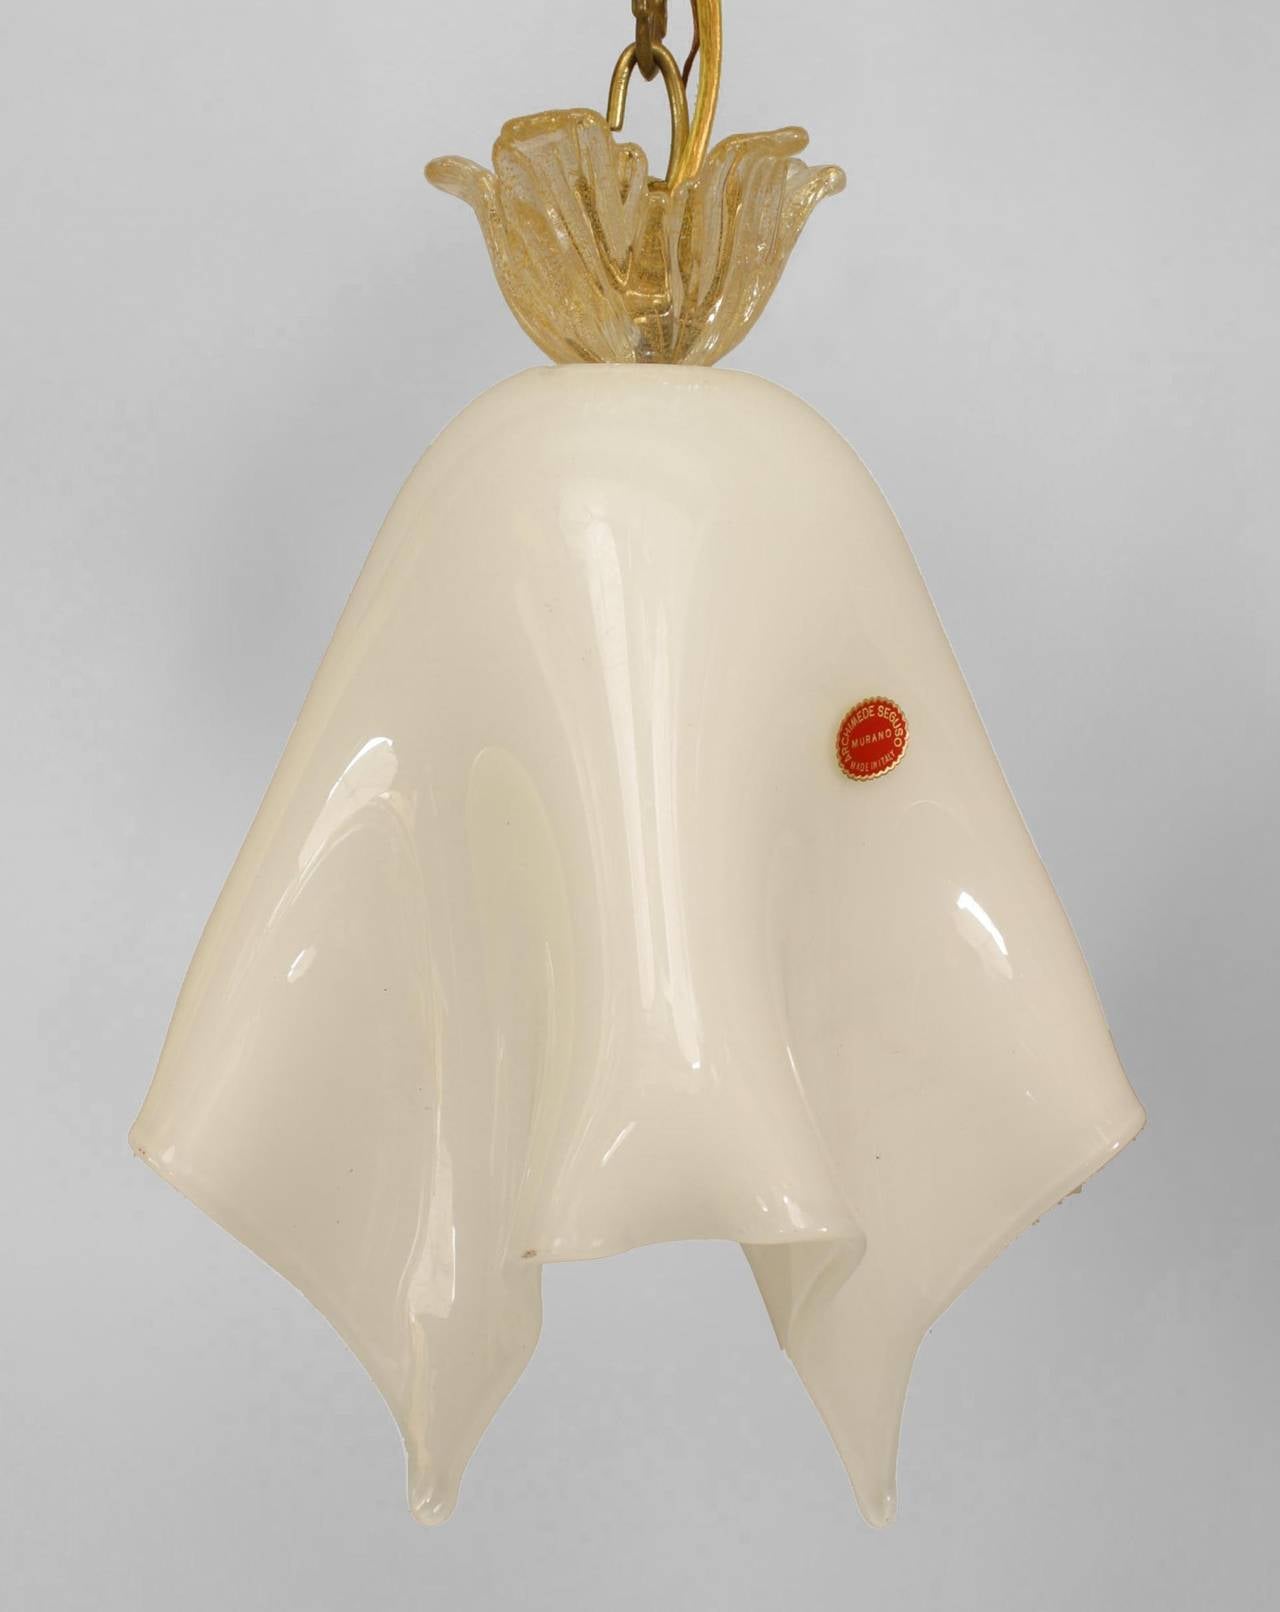 Italian 1950s Venetian Murano white glass lantern with handkerchief form & gold dusted flower finial top and gilt metal canopy. (ARCHIMEDI SEGUSO) (maker's label attached)
